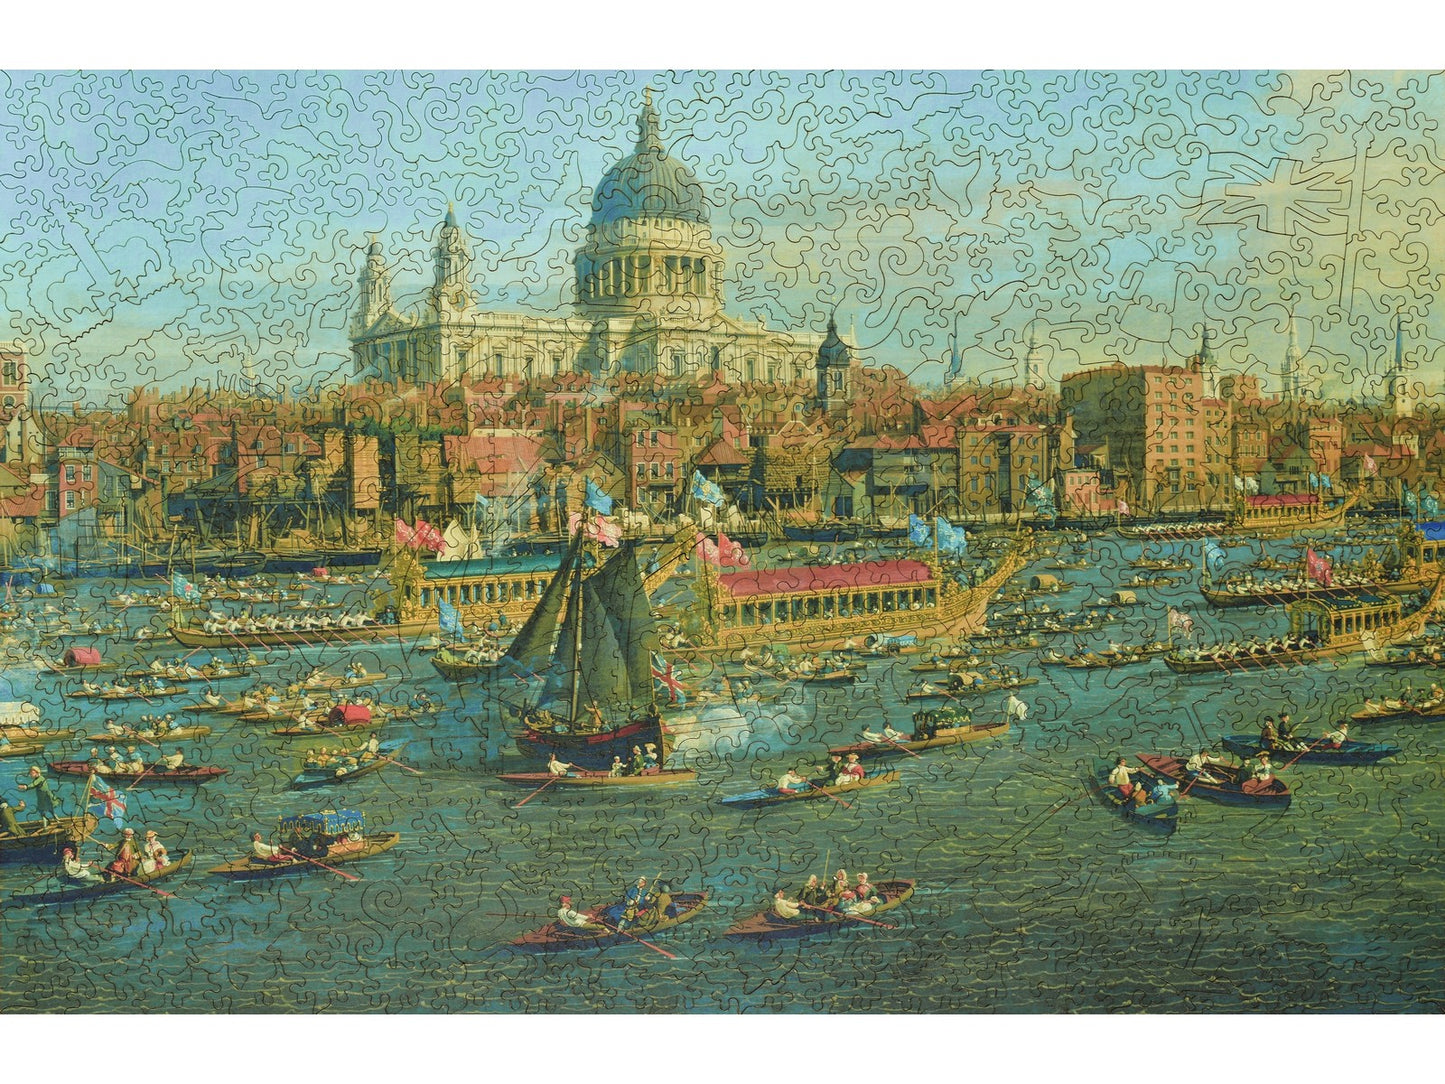 The front of the puzzle, The Thames and the City, which shows a river full of boats in a city.